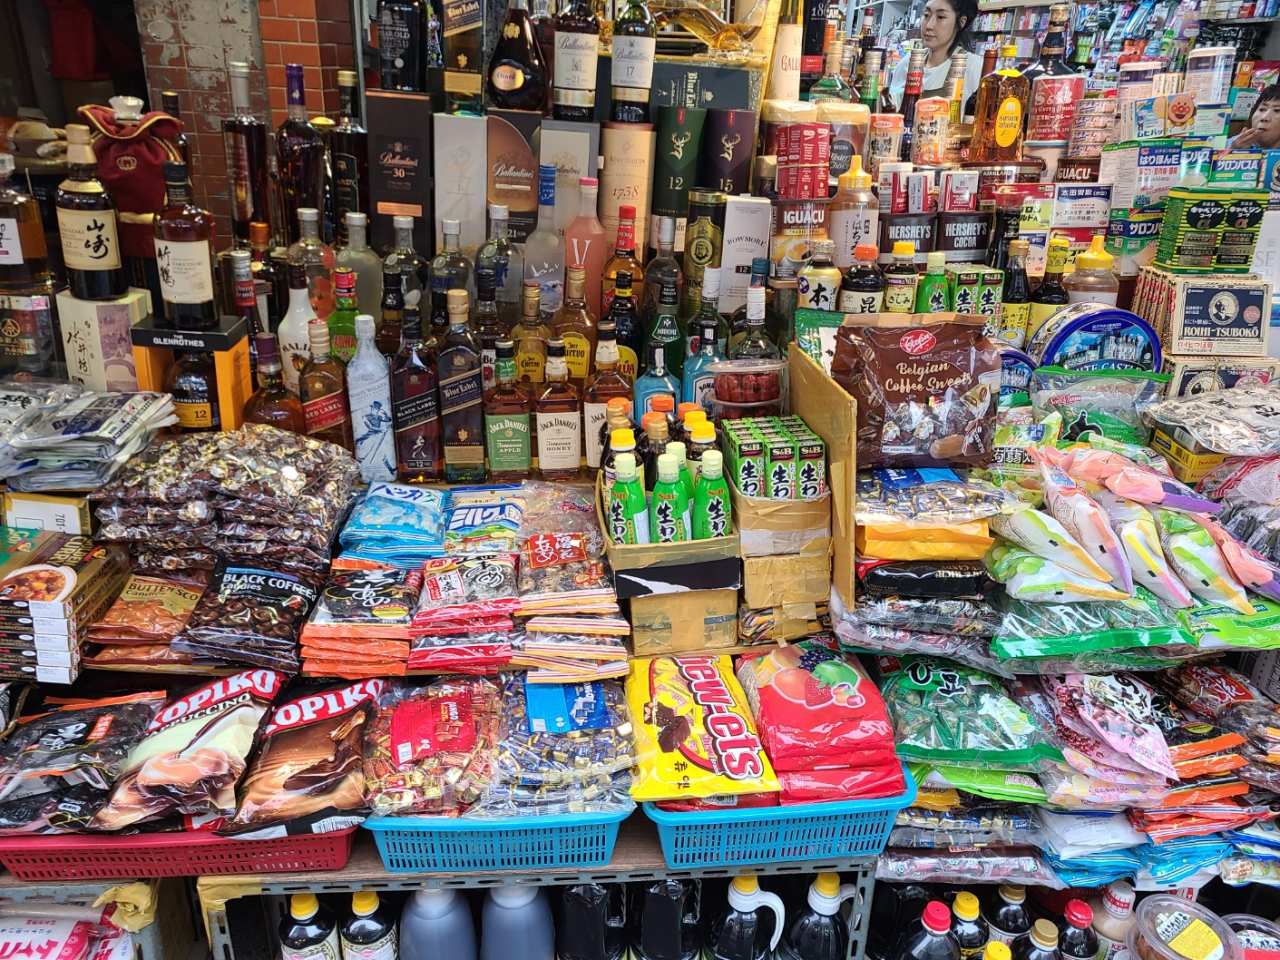 US and Japan-made and imported products are sold at a shop in Gukje Market. (Jung Min-kyung/ The Korea Herald)